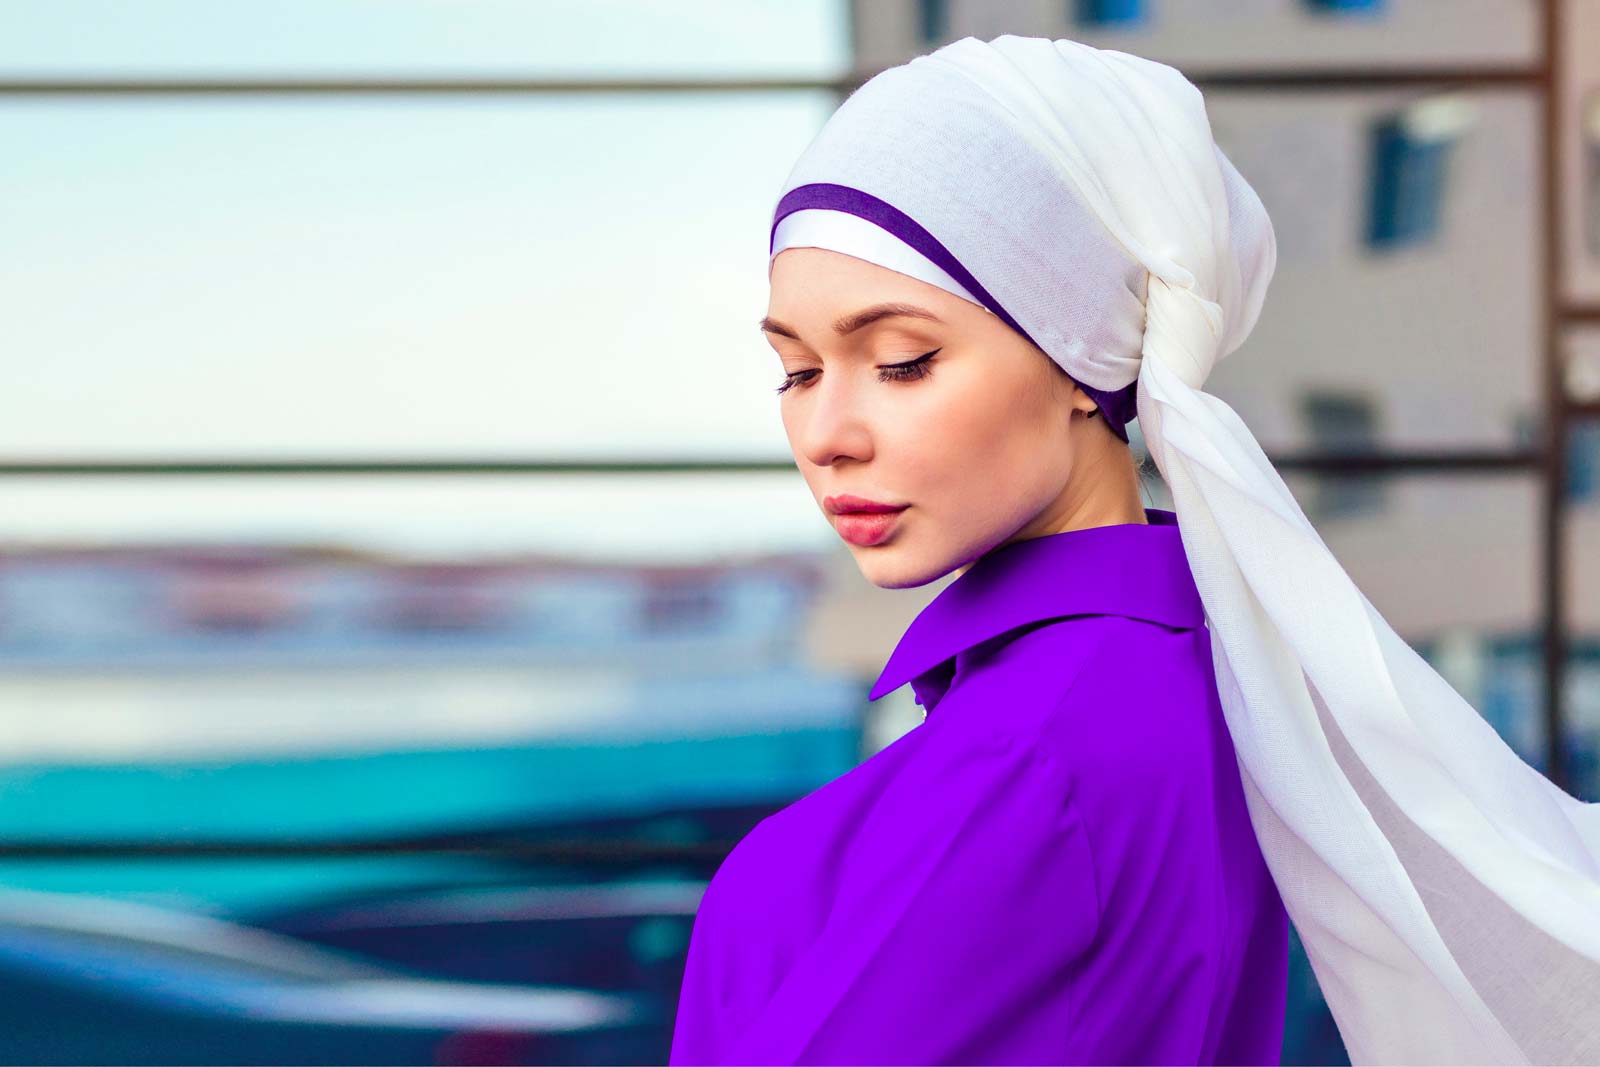 New Muslimah - 5 Things to Consider Before Marriage